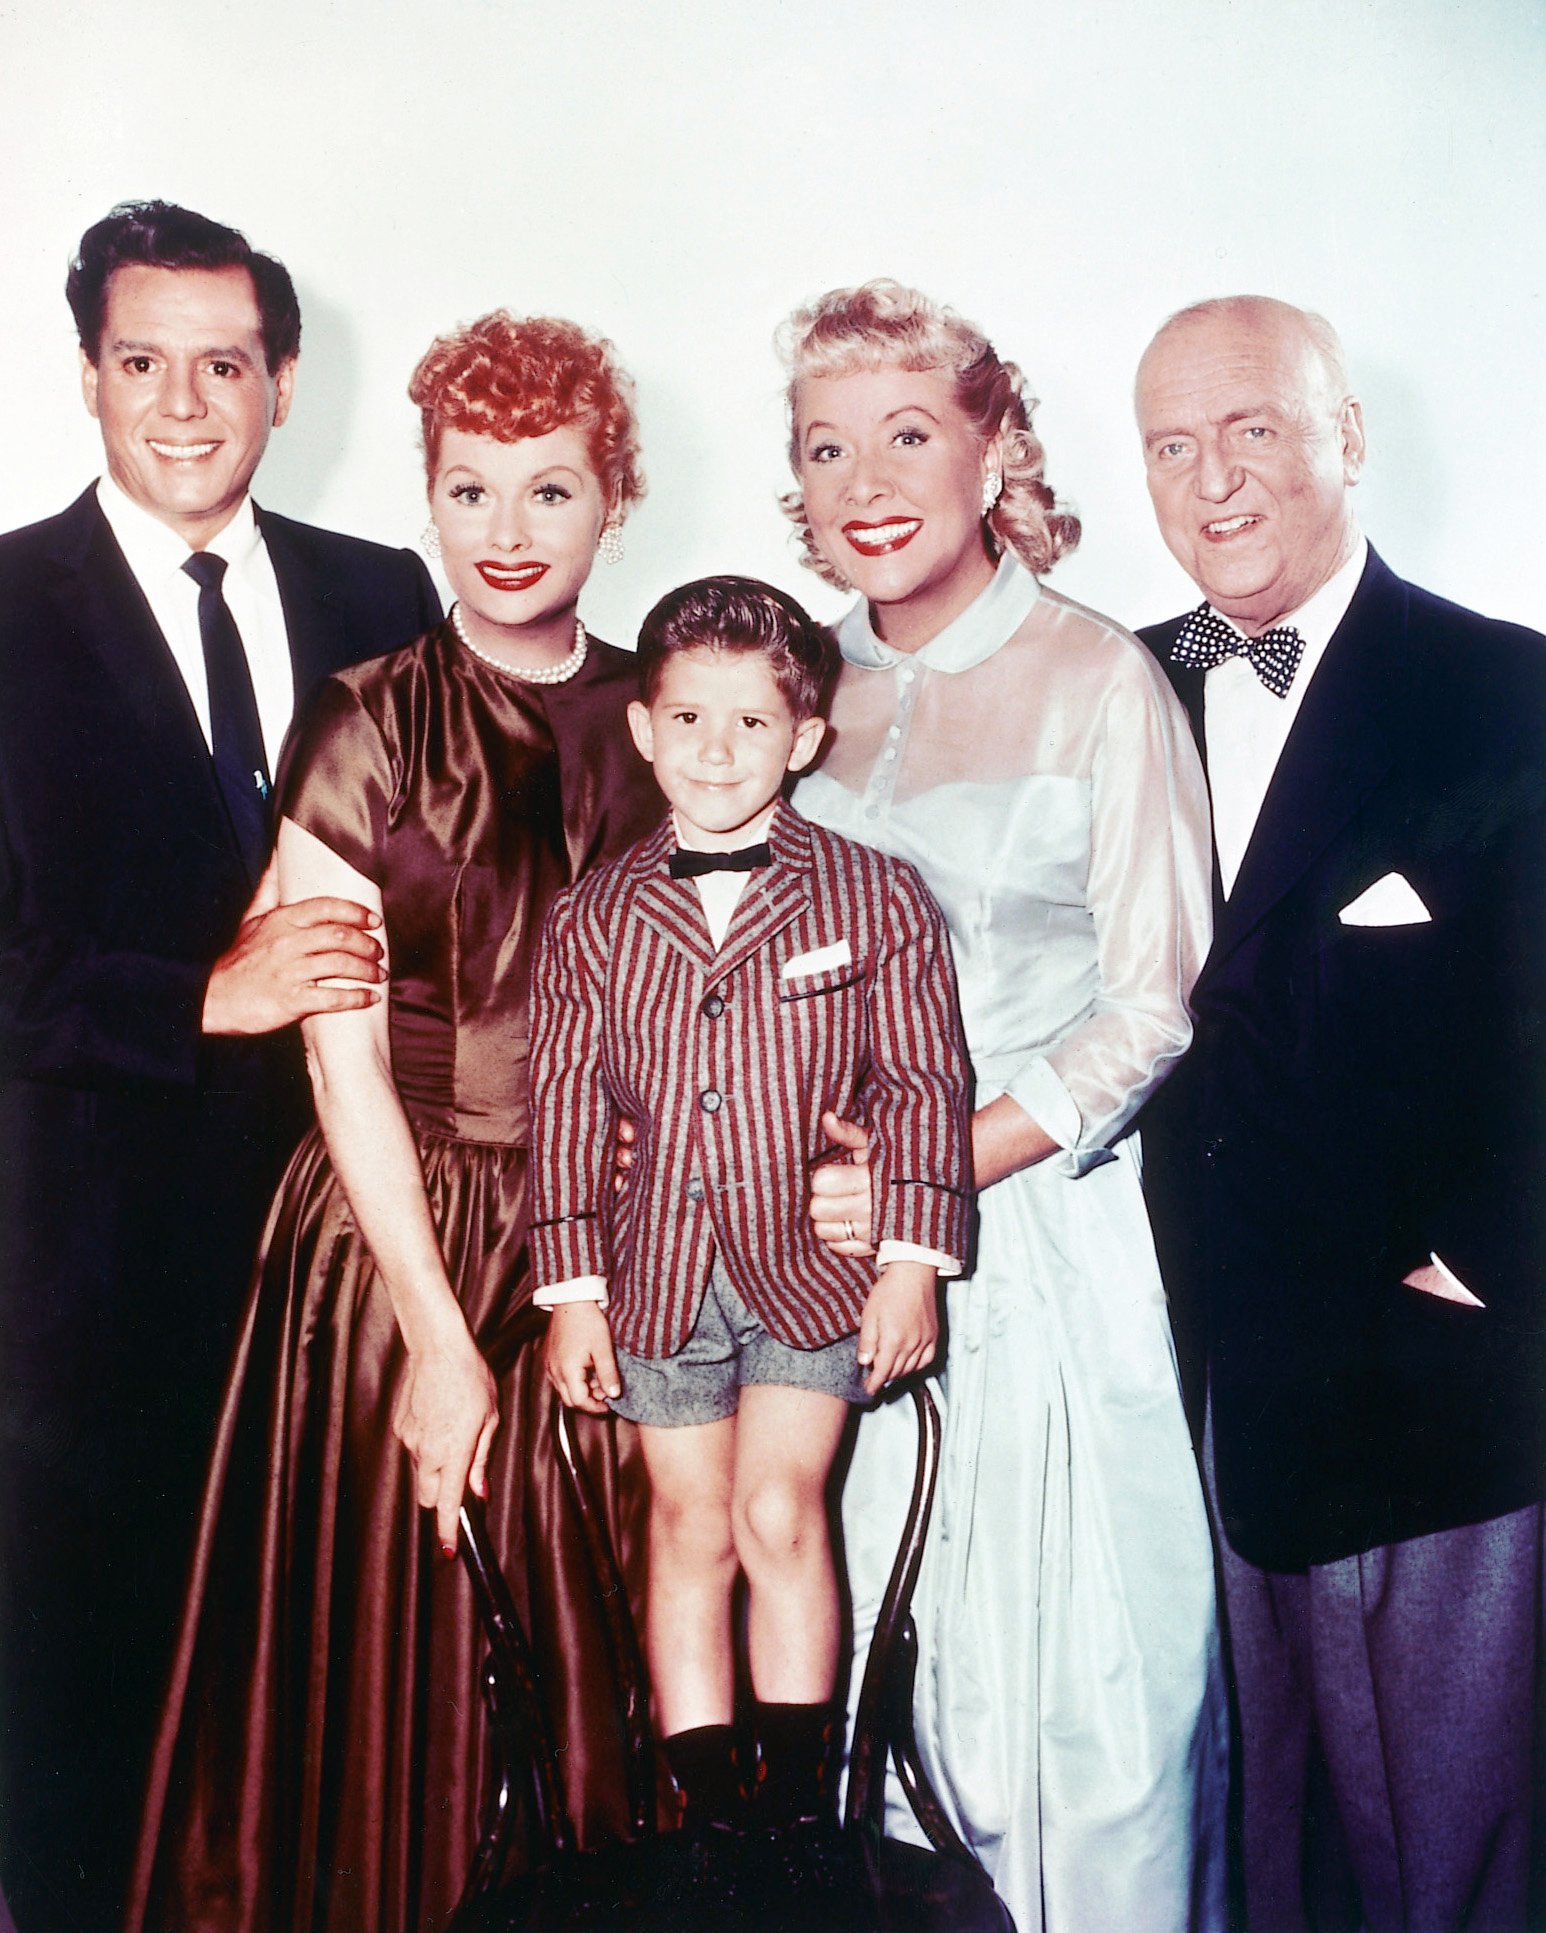 The cast of 'I Love Lucy' 1955